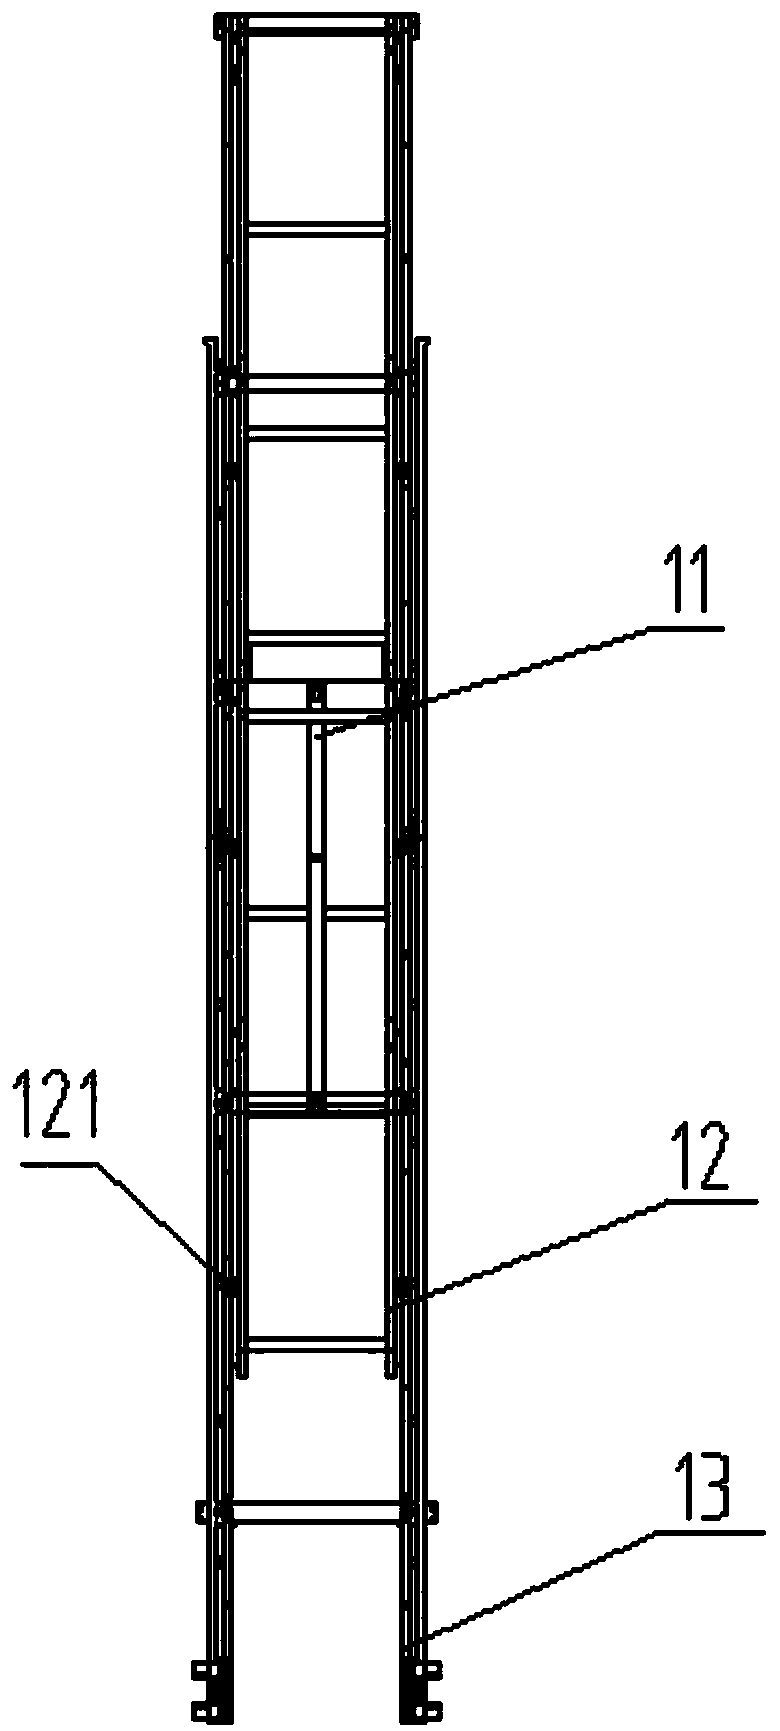 Pallet-free off-line stacking device